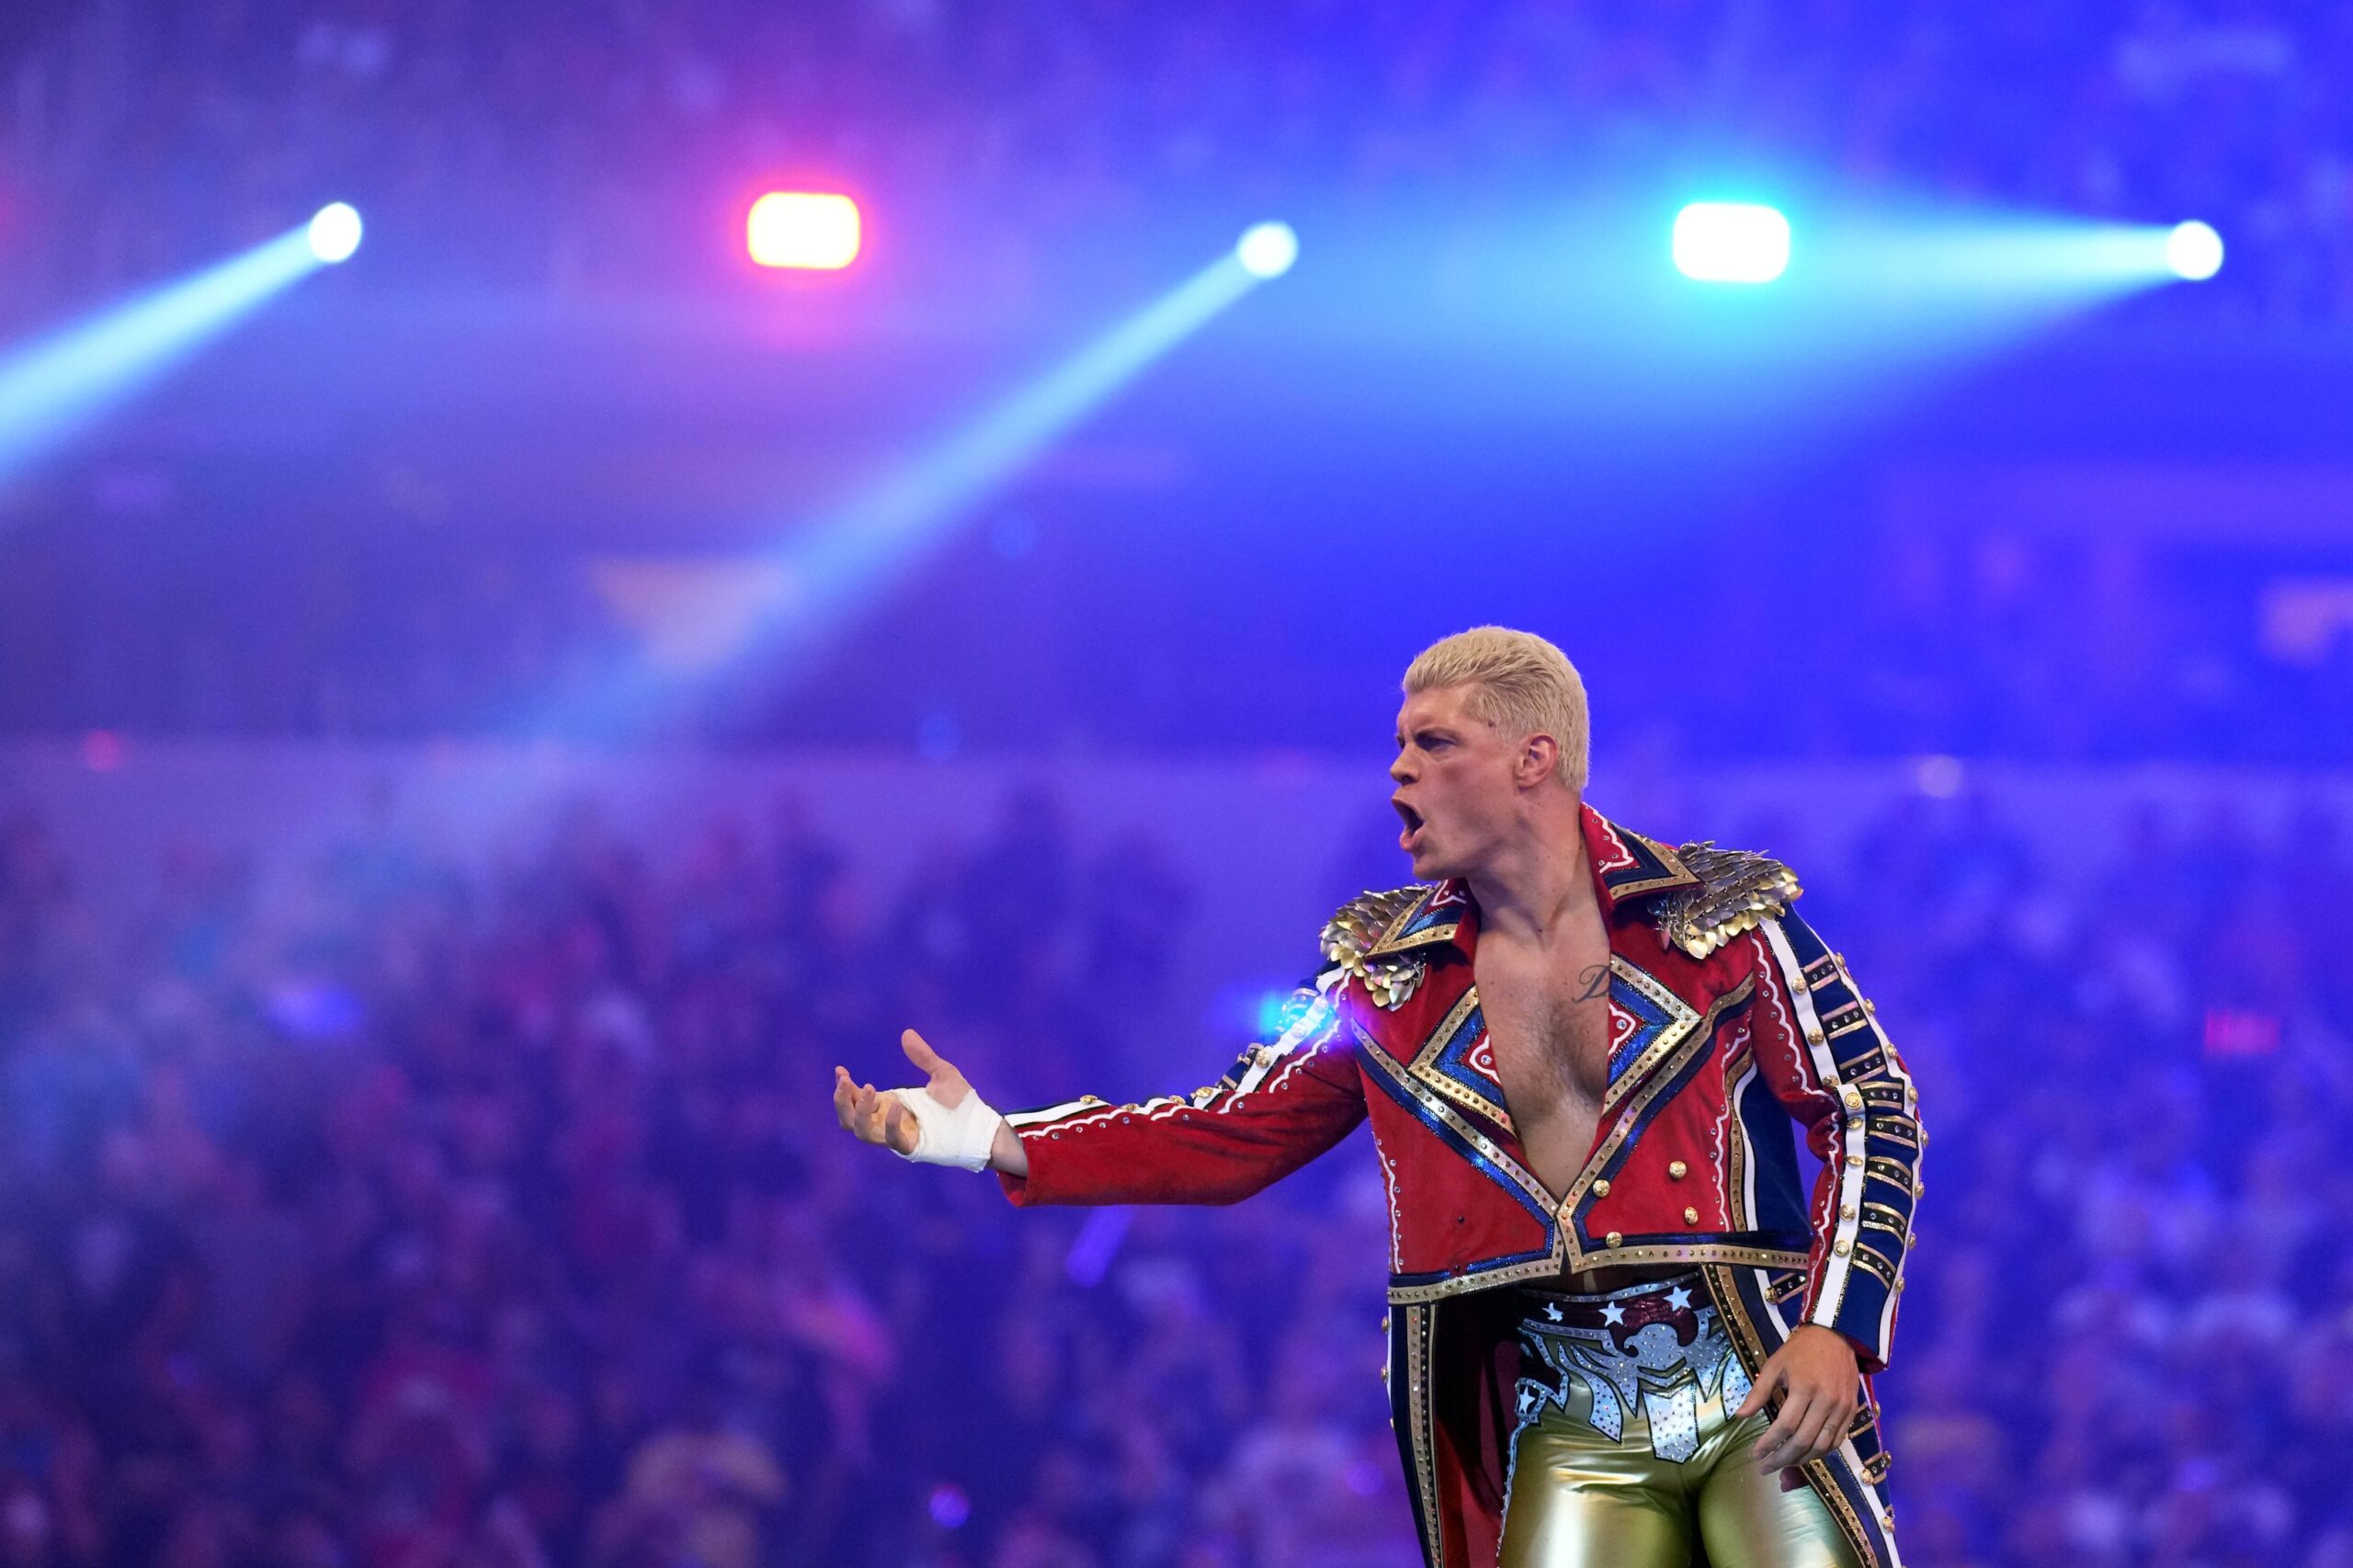 Cody Rhodes has left AEW and officially returned to WWE.